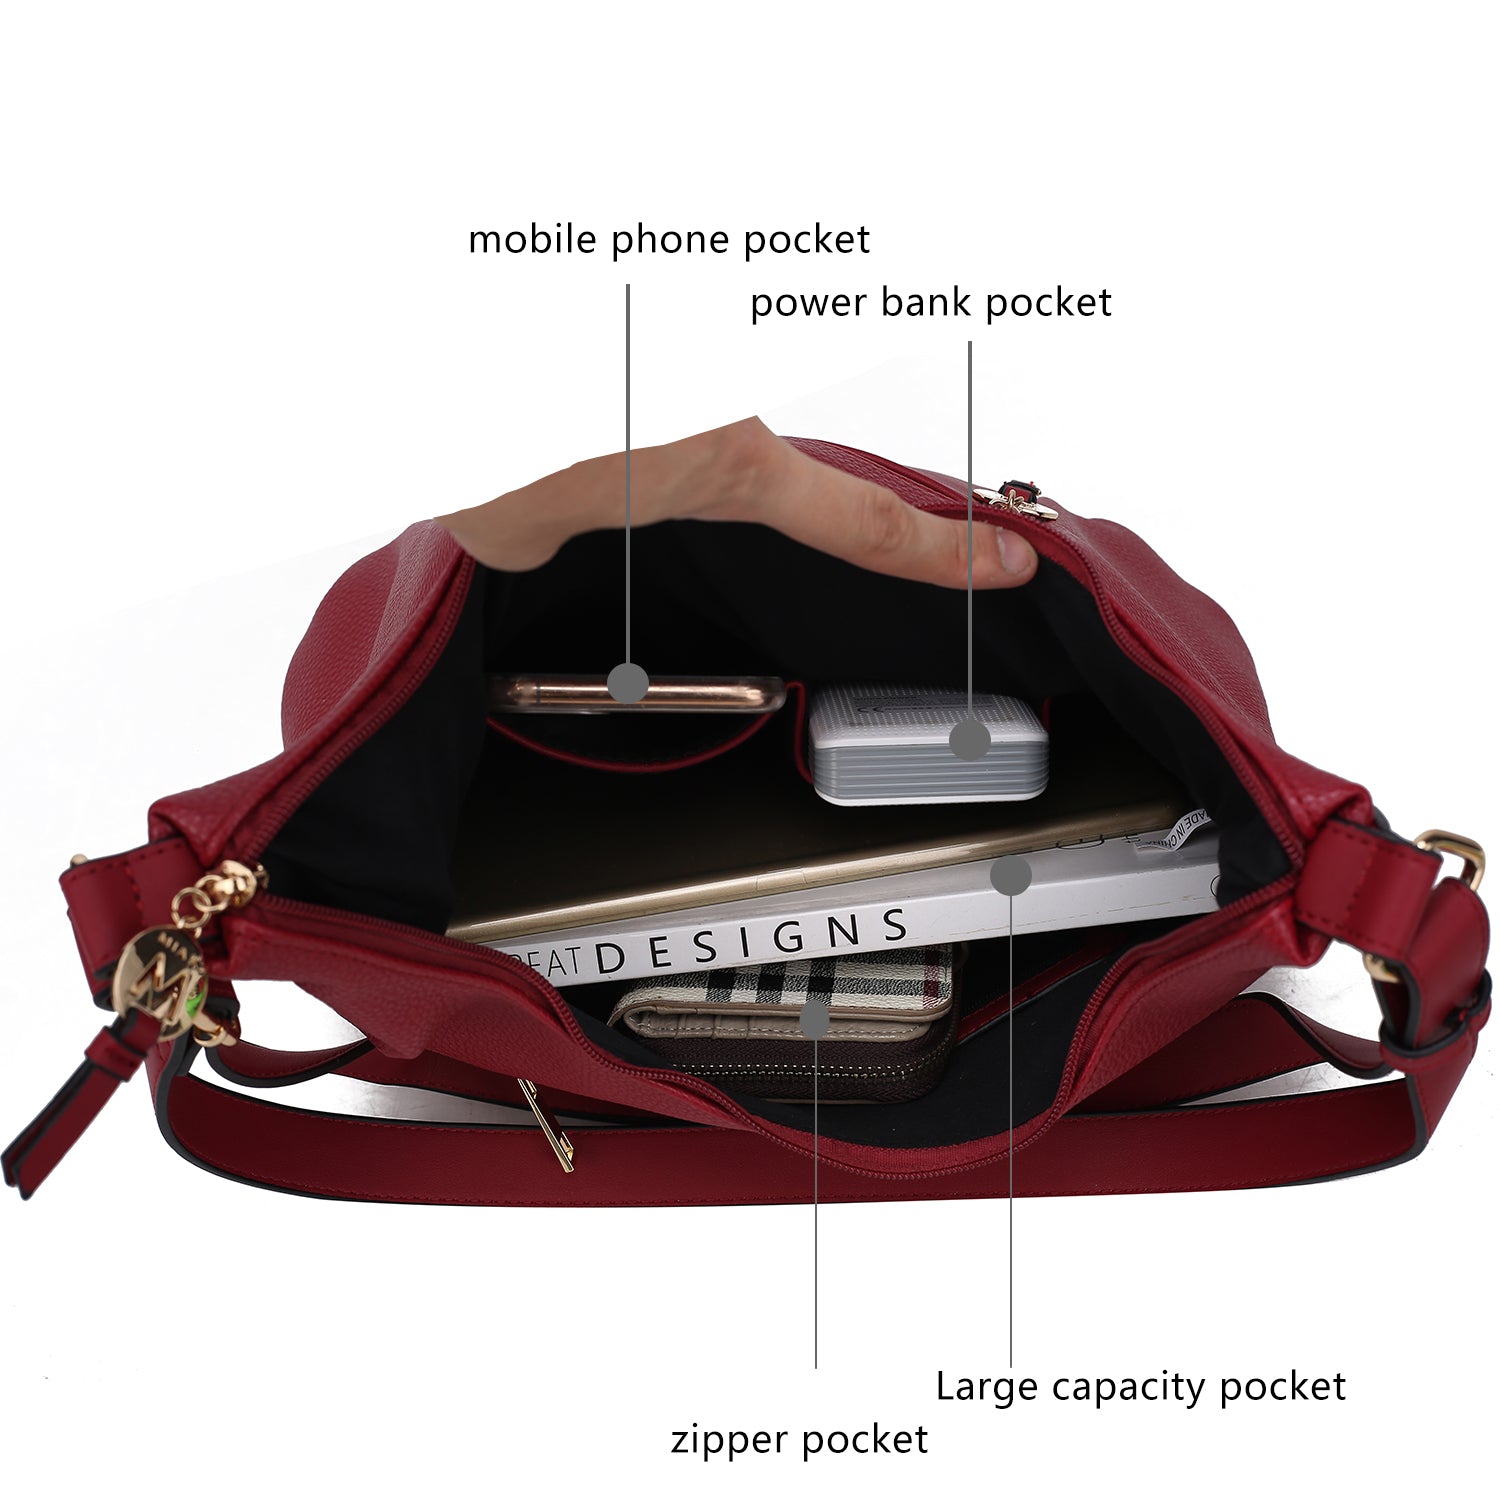 A Lavinia Vegan Leather Women’s Shoulder Bag by Pink Orpheus with gold-tone embellishments and a cell phone inside.